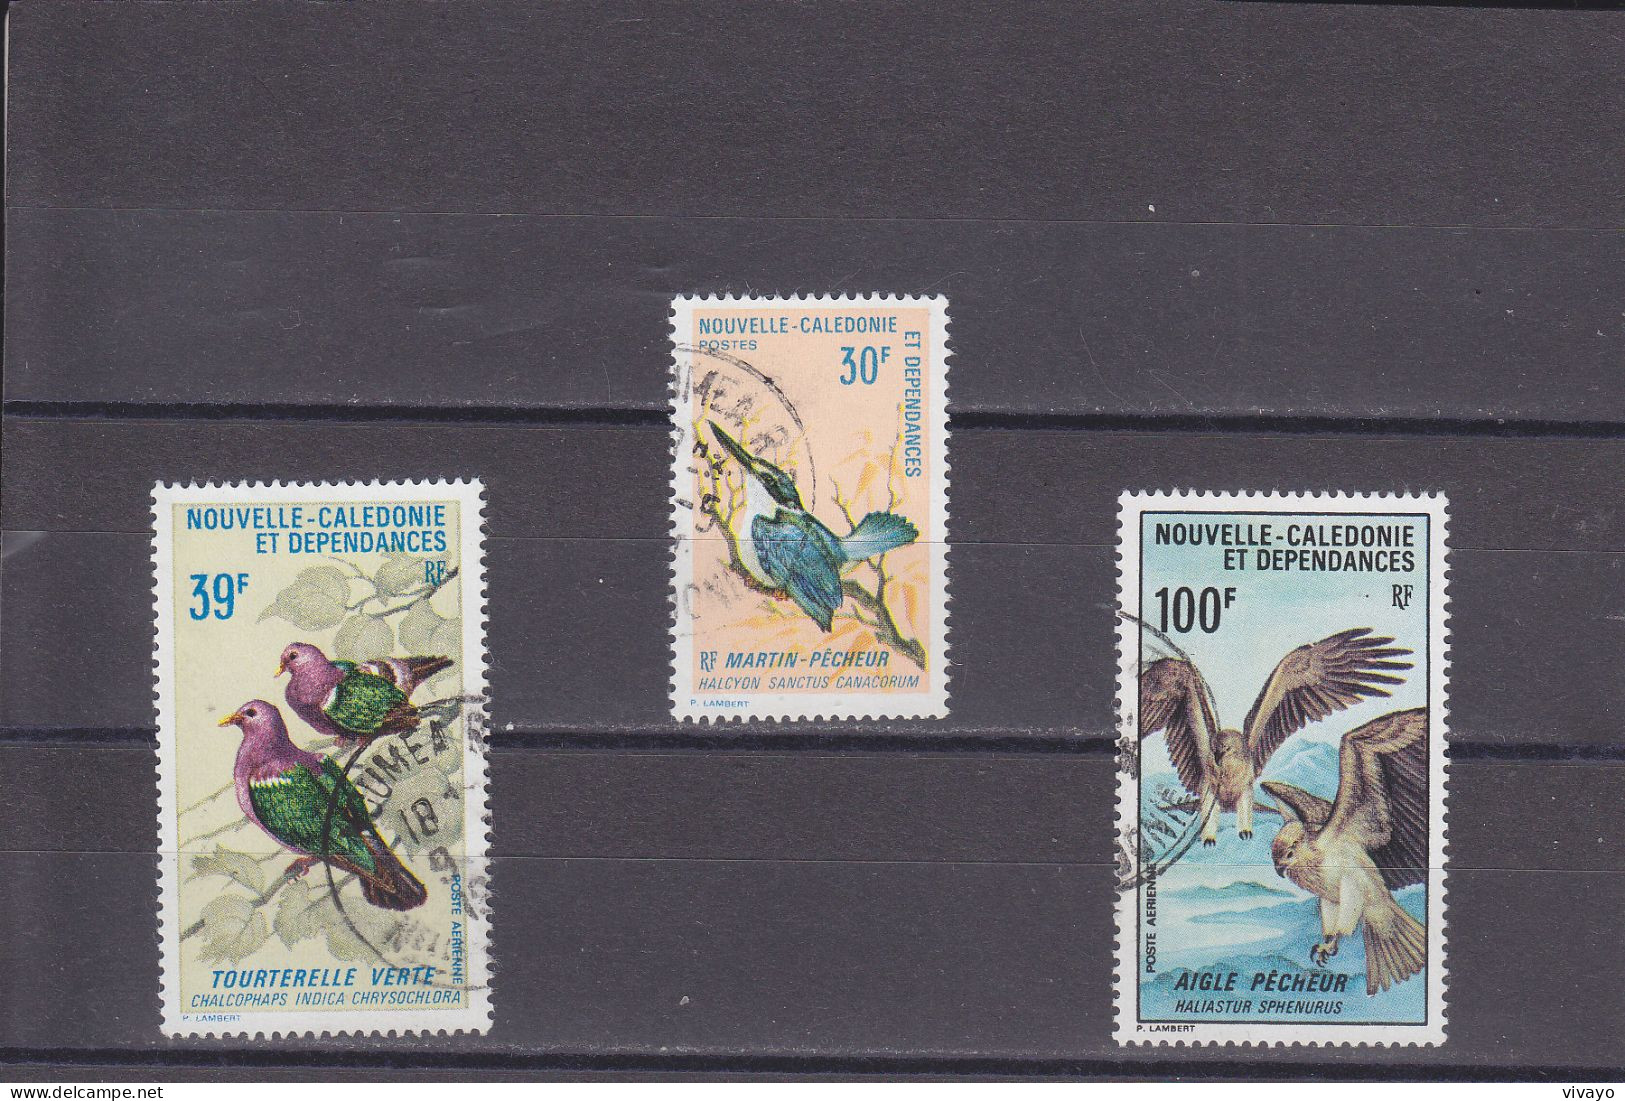 NOUVELLE CALEDONIE - O / FINE CANCELLED - 1970 - BIRDS - Yv. 365, PA 110/1  -  Mi. 481/83 - Used Stamps